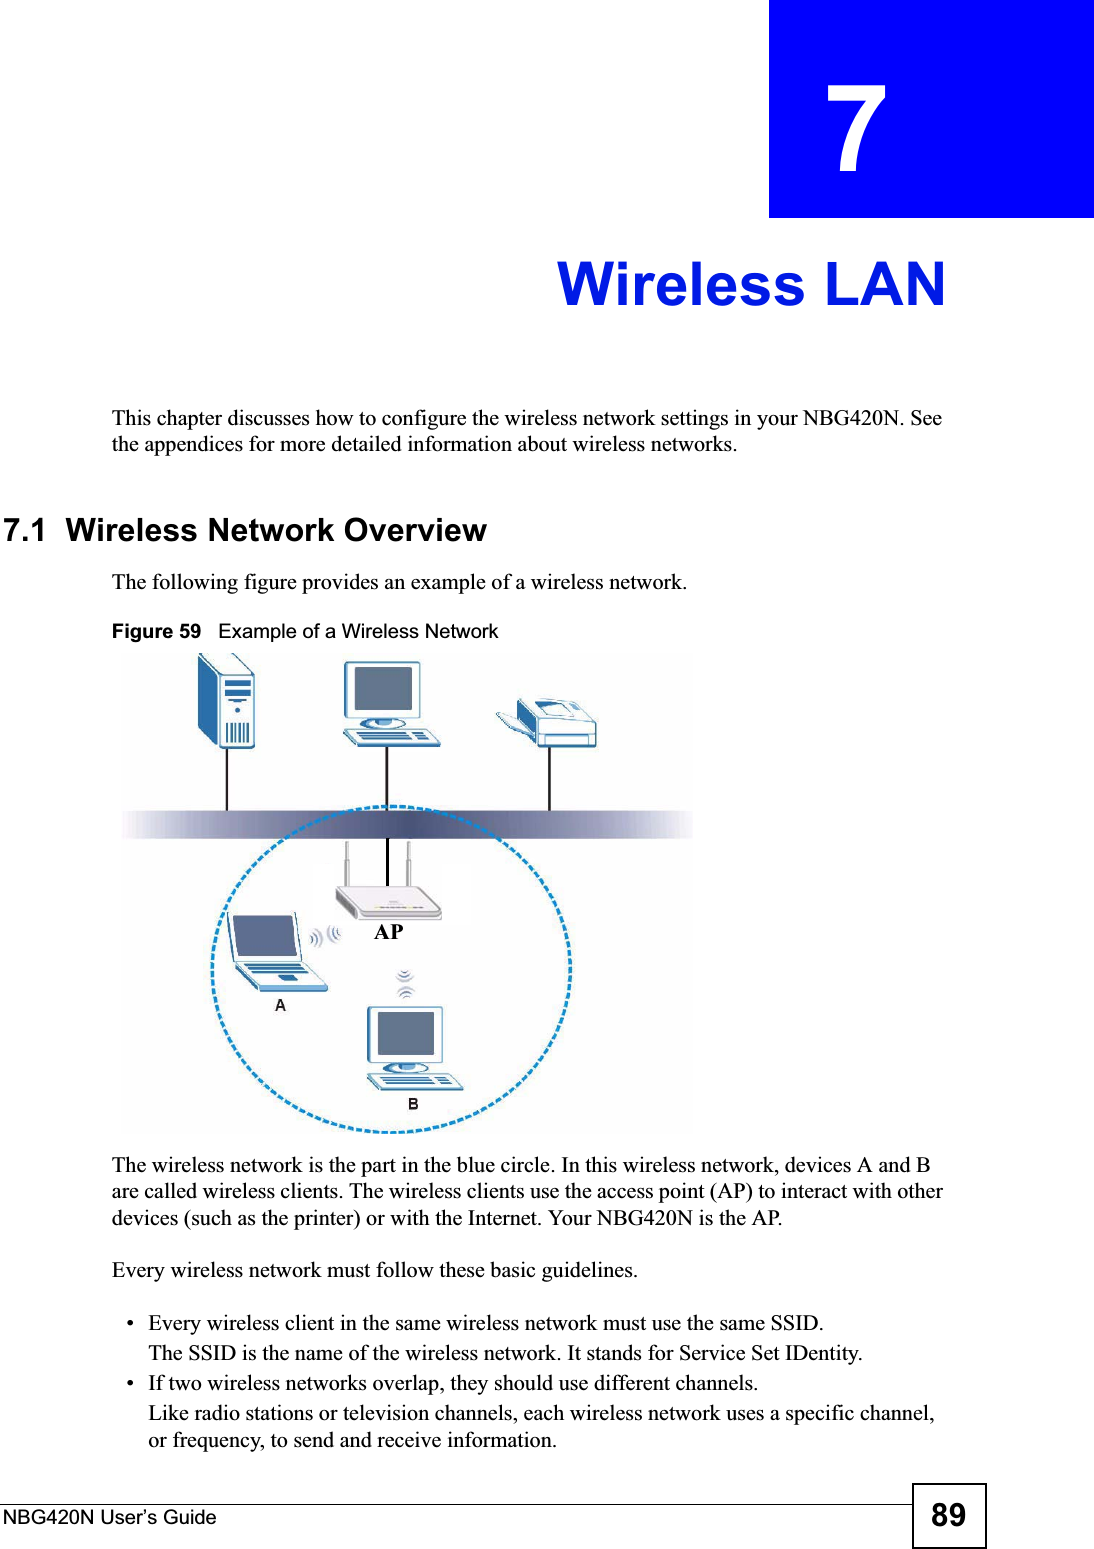 NBG420N User’s Guide 89CHAPTER  7 Wireless LANThis chapter discusses how to configure the wireless network settings in your NBG420N. See the appendices for more detailed information about wireless networks.7.1  Wireless Network OverviewThe following figure provides an example of a wireless network.Figure 59   Example of a Wireless NetworkThe wireless network is the part in the blue circle. In this wireless network, devices A and B are called wireless clients. The wireless clients use the access point (AP) to interact with other devices (such as the printer) or with the Internet. Your NBG420N is the AP.Every wireless network must follow these basic guidelines.• Every wireless client in the same wireless network must use the same SSID.The SSID is the name of the wireless network. It stands for Service Set IDentity.• If two wireless networks overlap, they should use different channels.Like radio stations or television channels, each wireless network uses a specific channel, or frequency, to send and receive information.AP